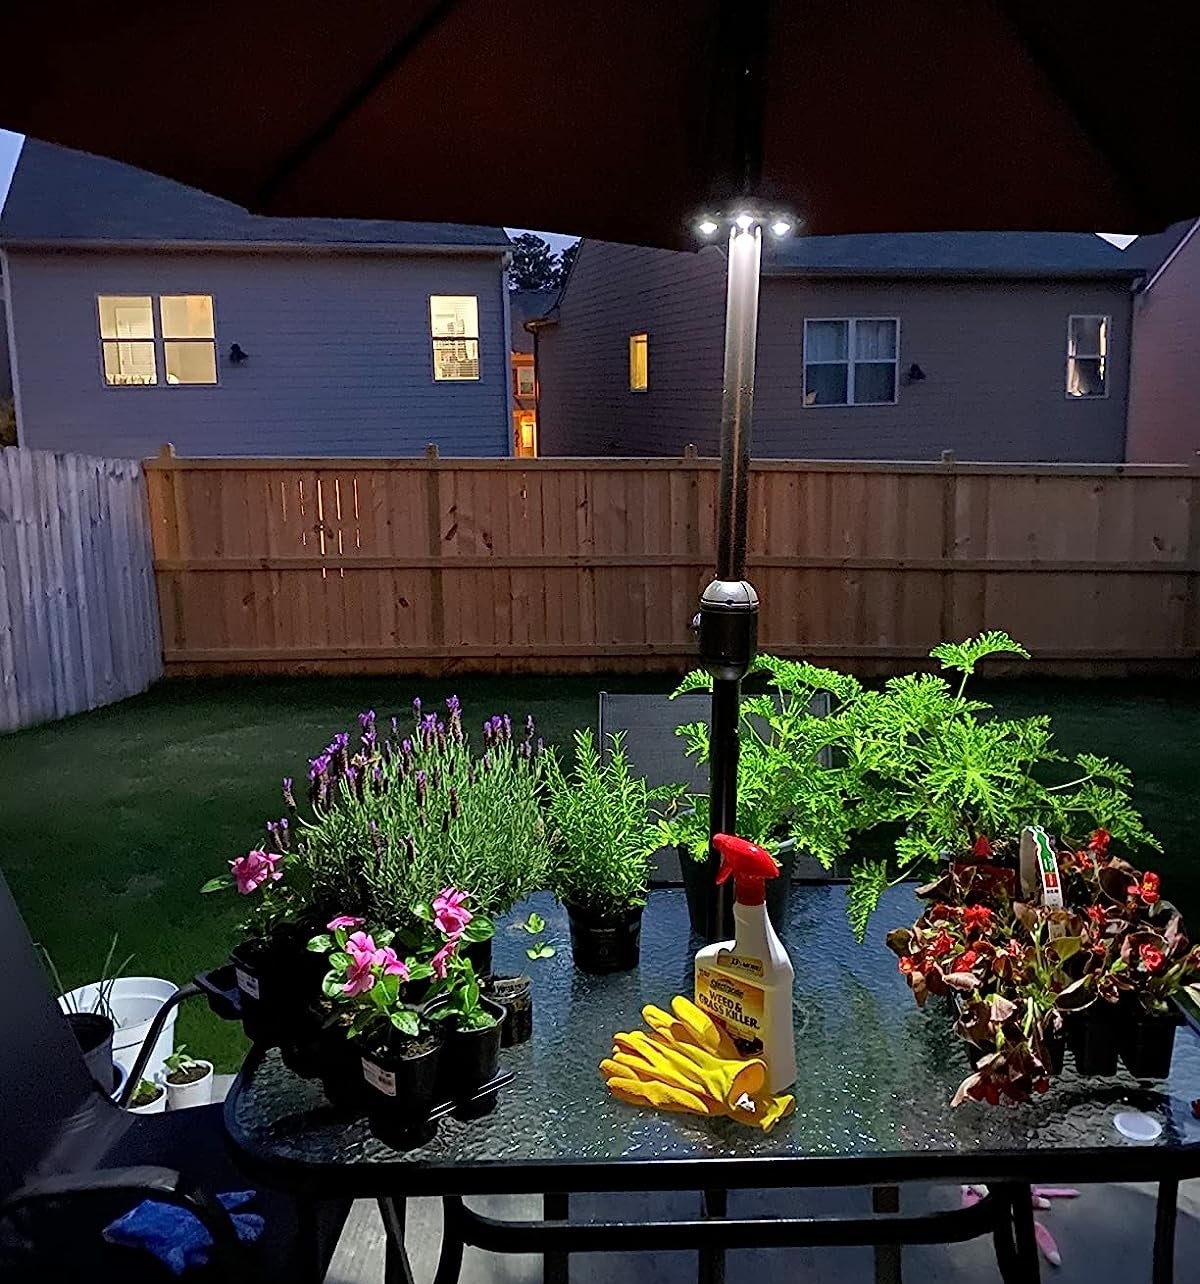 a reviewer photo of the light on the umbrella pole illuminating a table full of garden supplies in a dusky backyard